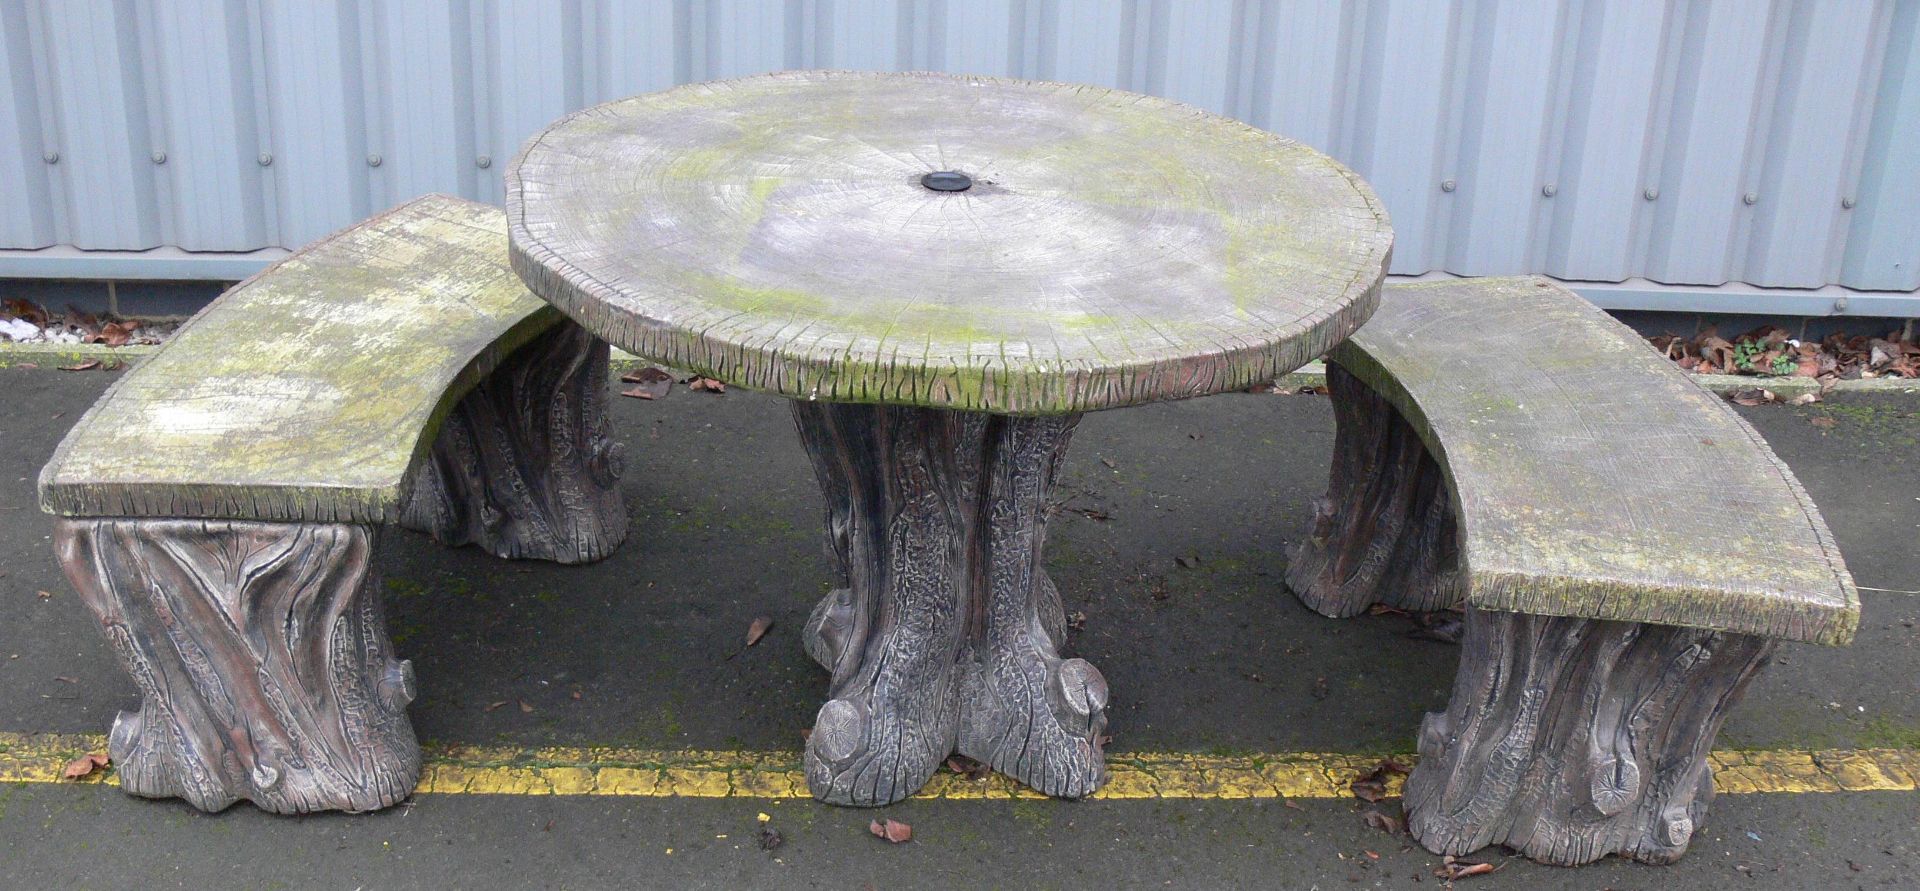 A 3 Piece outside Table and Chair Set, Wood Effect Possibly Resin. Please note there is a £10 + VAT